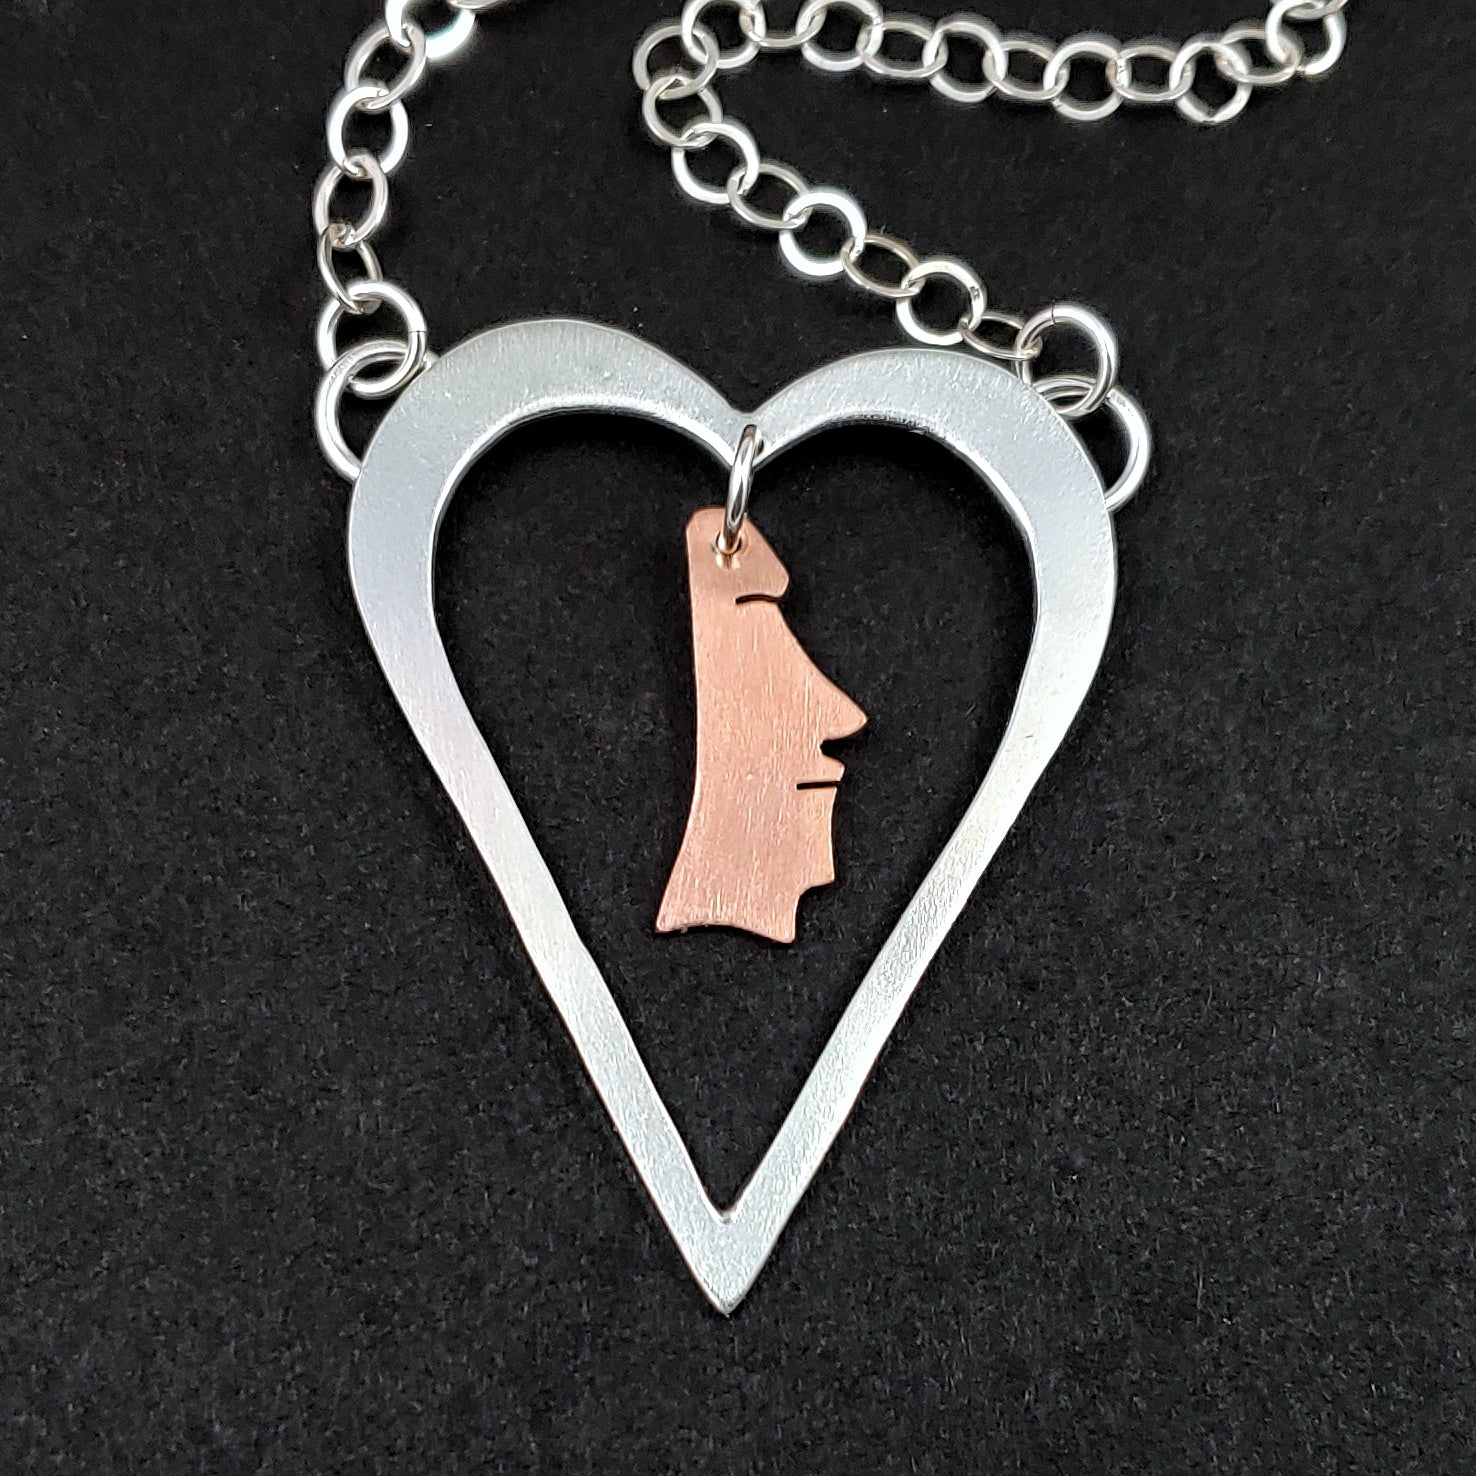 Sterling silver heart necklace with a copper moai head in the middle